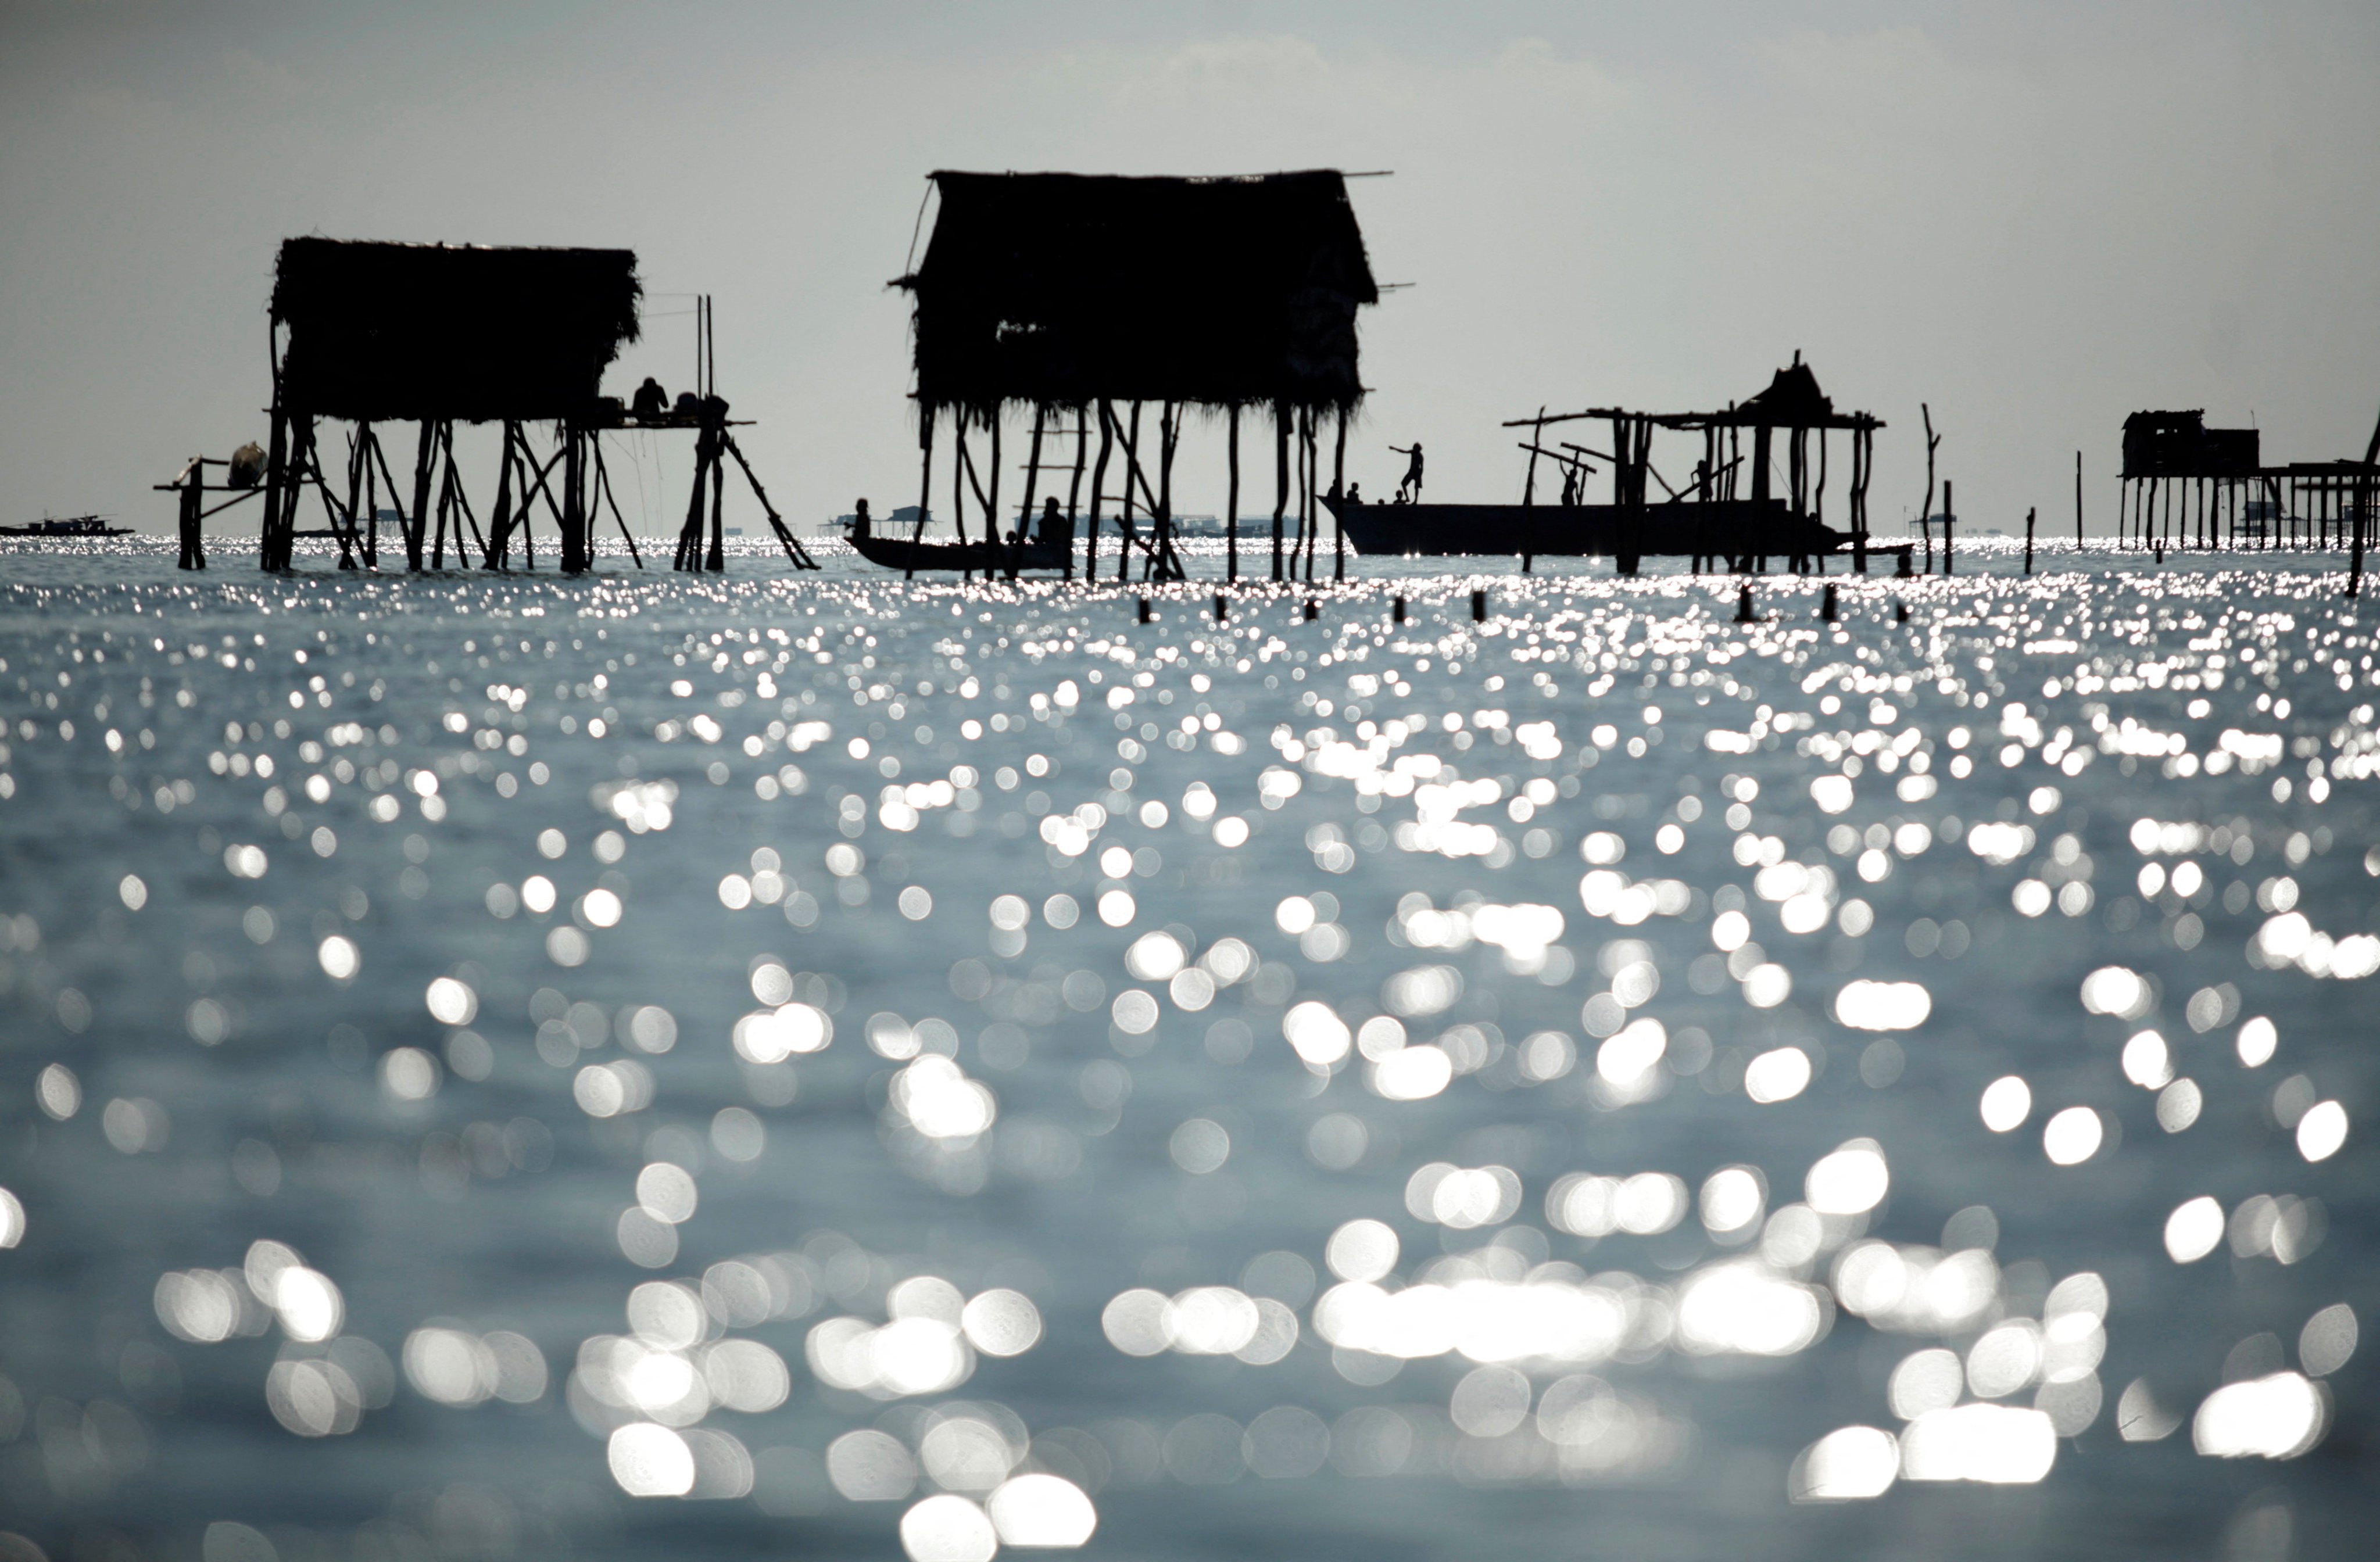 A neighbourhood of a Bajau Laut community is seen in Sulawesi Sea in Malaysia’s state of Sabah on Borneo island. File photo: Reuters